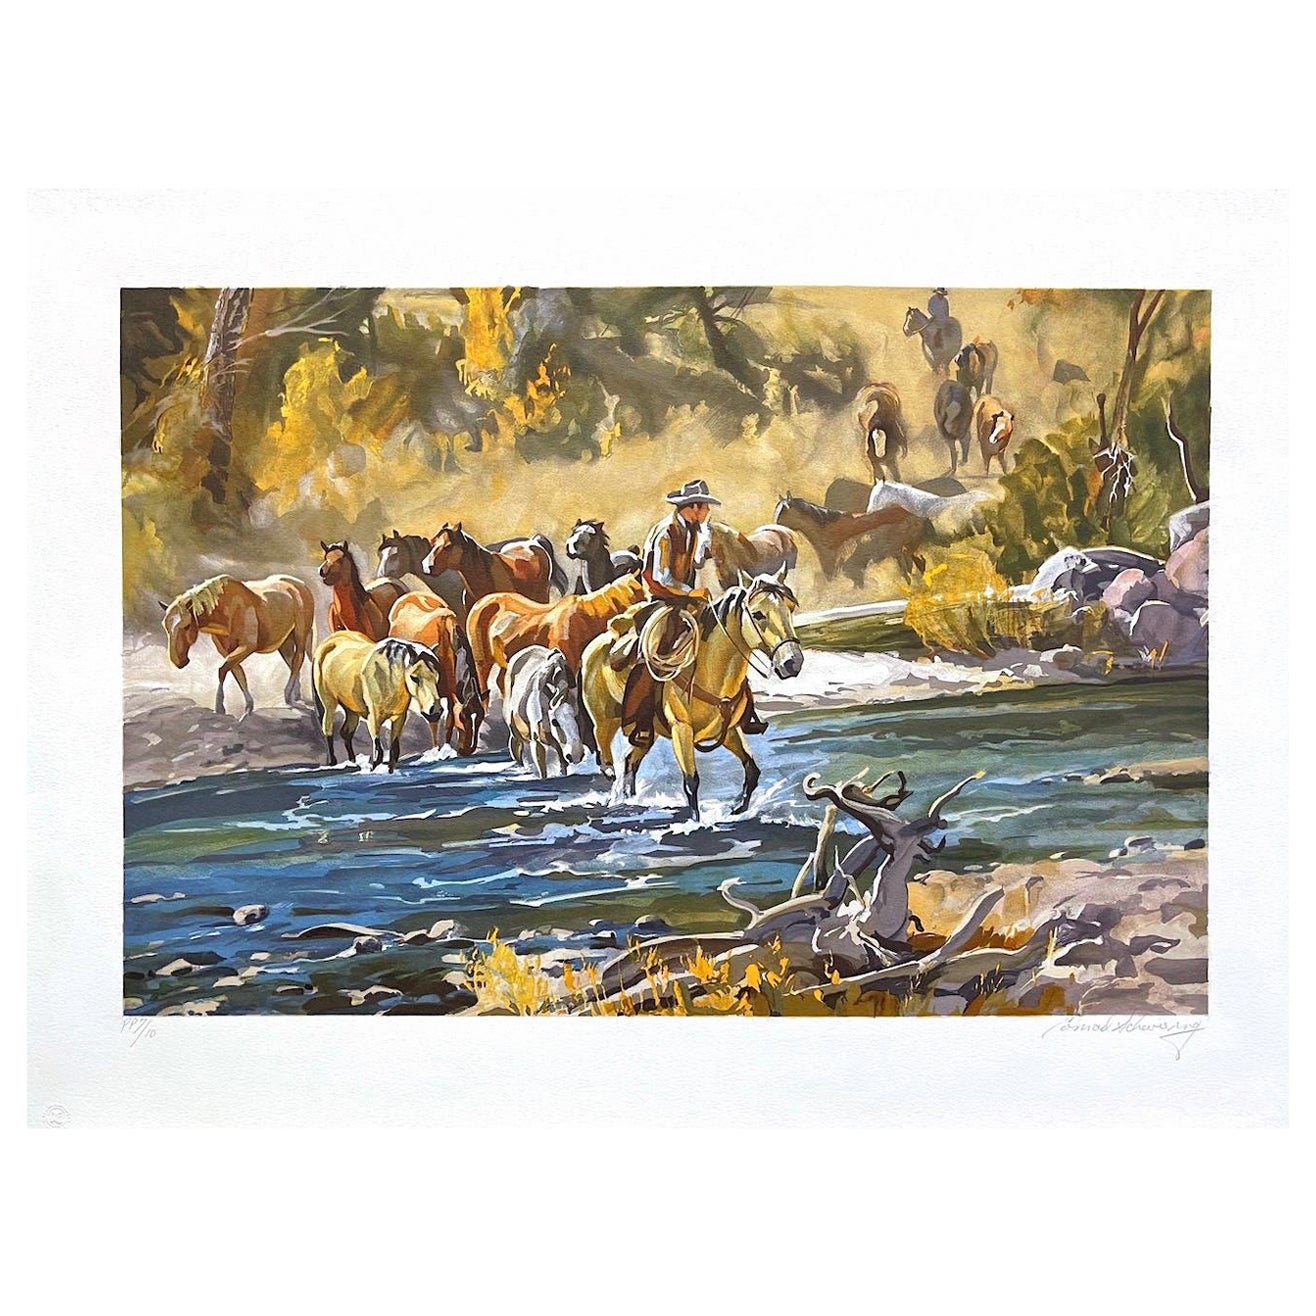 EASIN' EM HOME Signed Lithograph, Western Scene, Cowboy Crossing River w Horses 